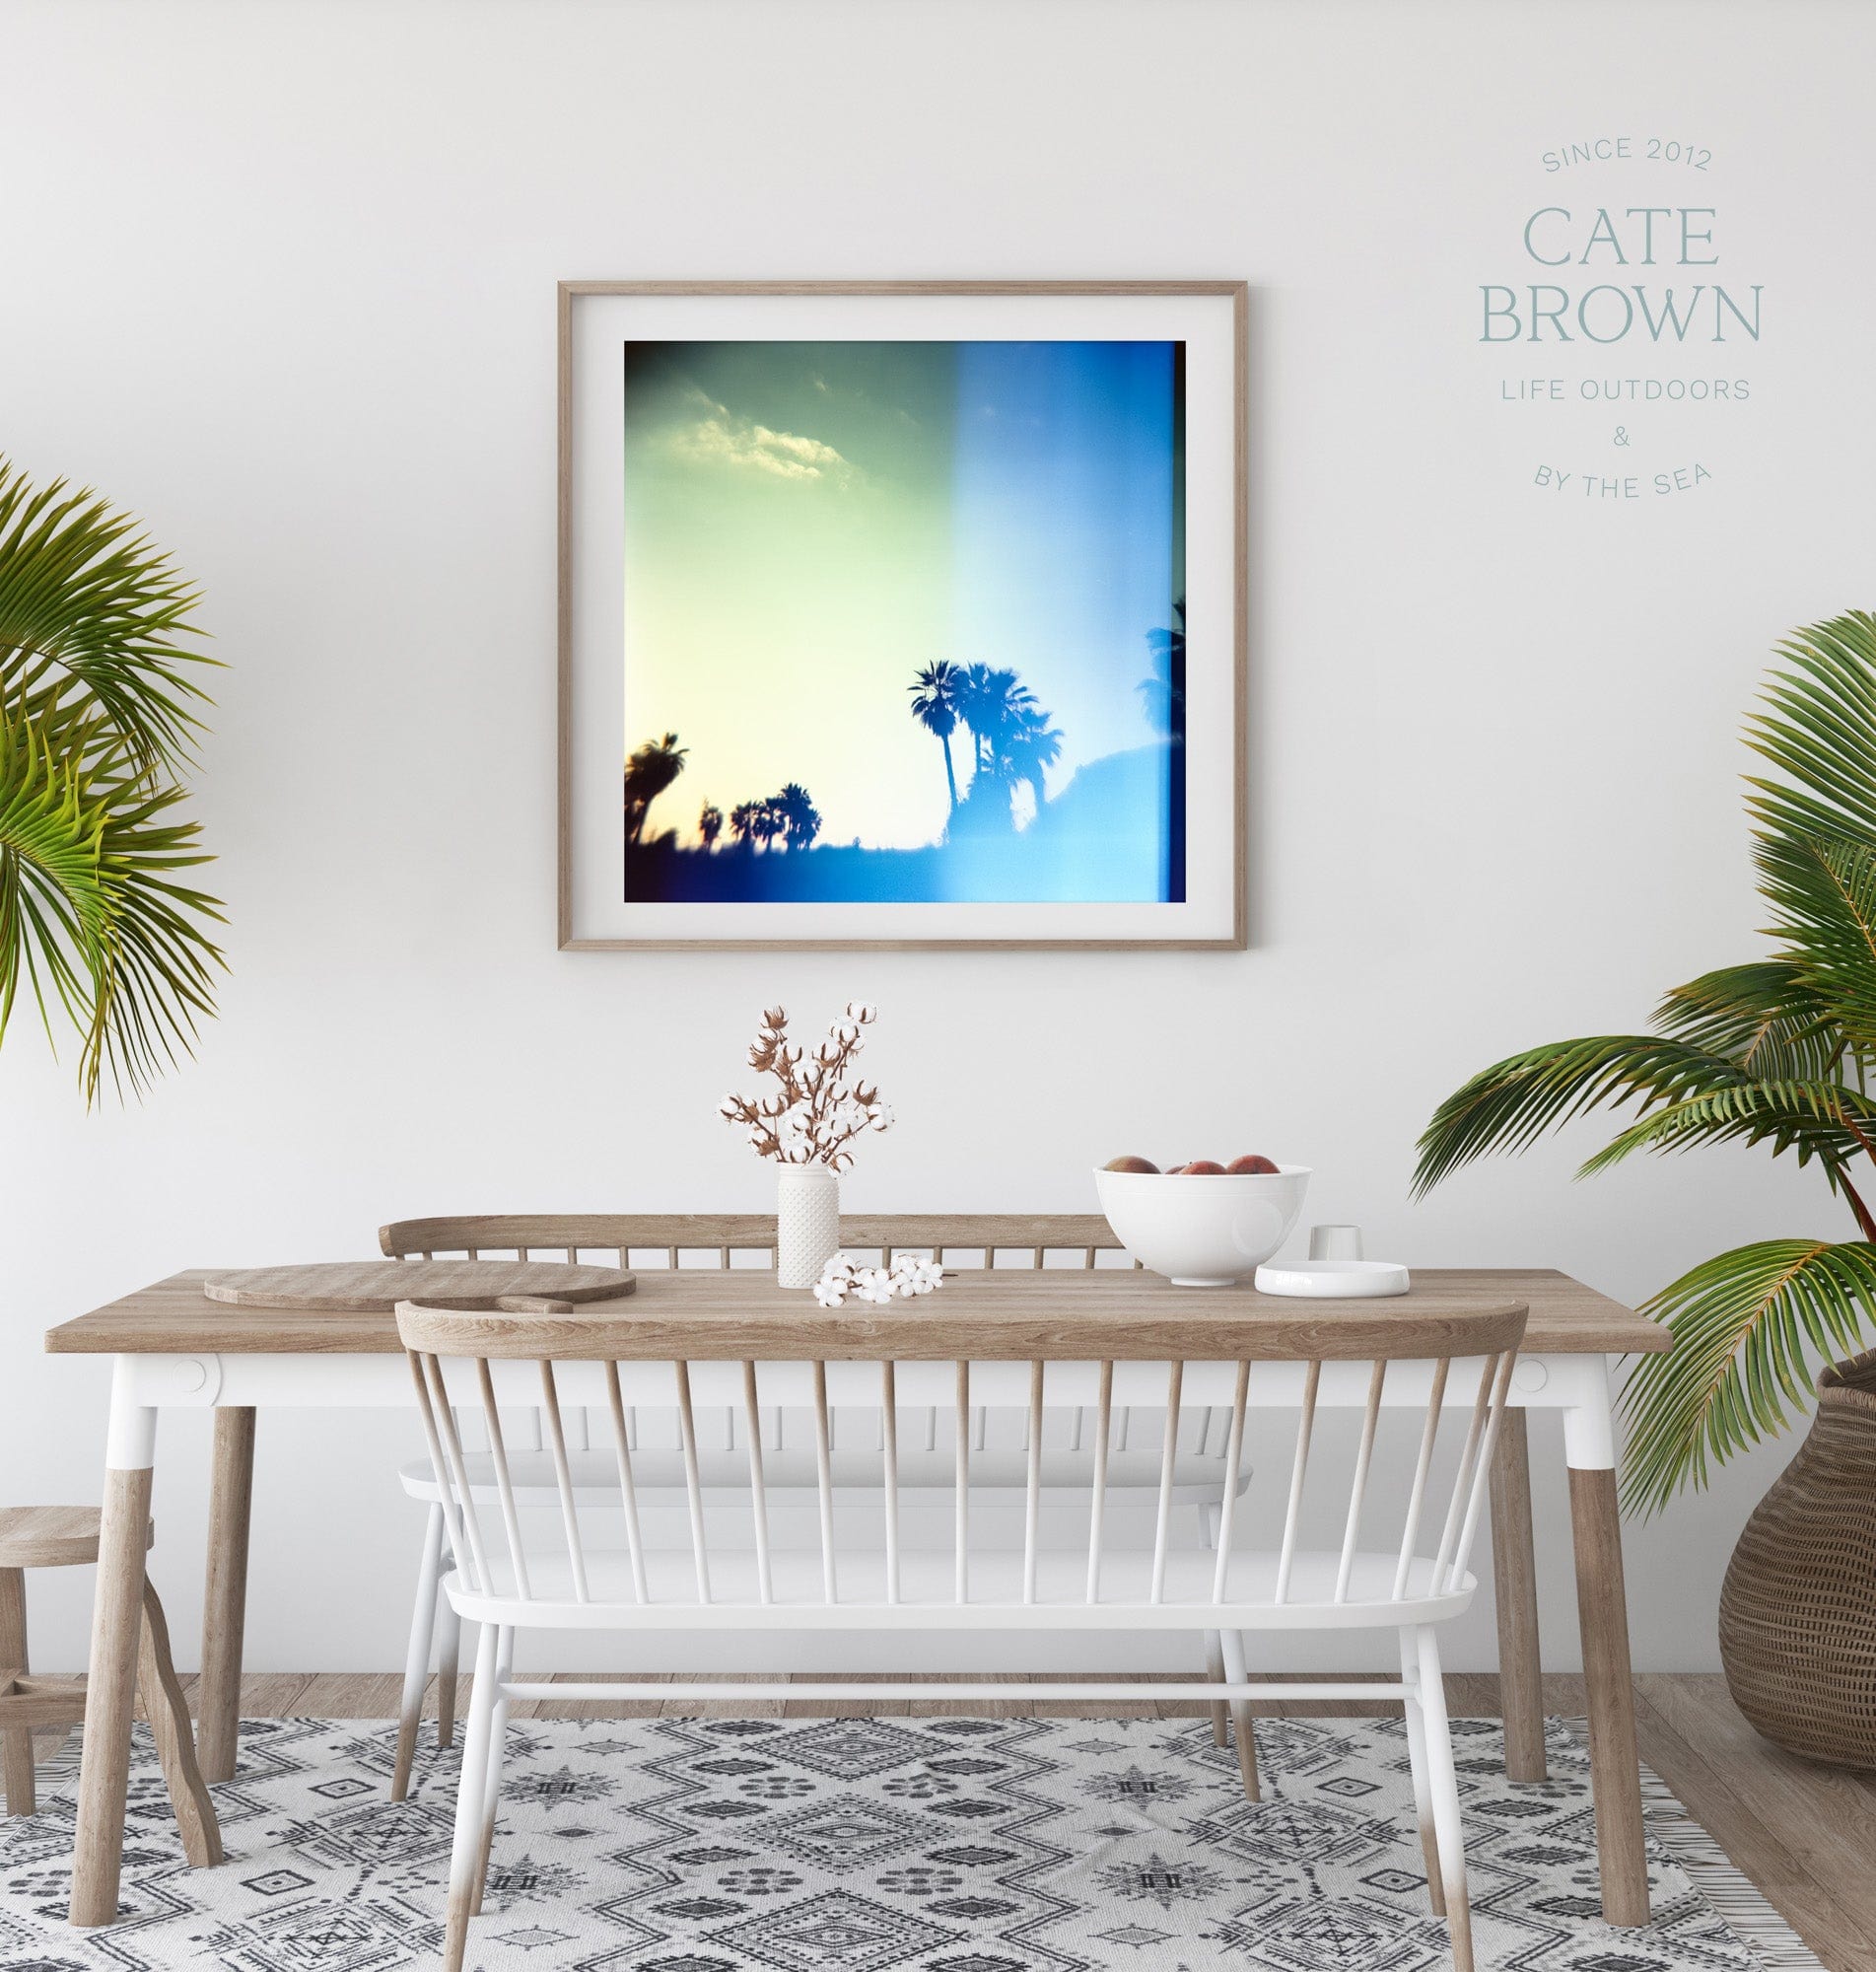 Cate Brown Photo Fine Art Print / 8"x8" / None (Print Only) Baja Palms #2  //  Film Photography Made to Order Ocean Fine Art